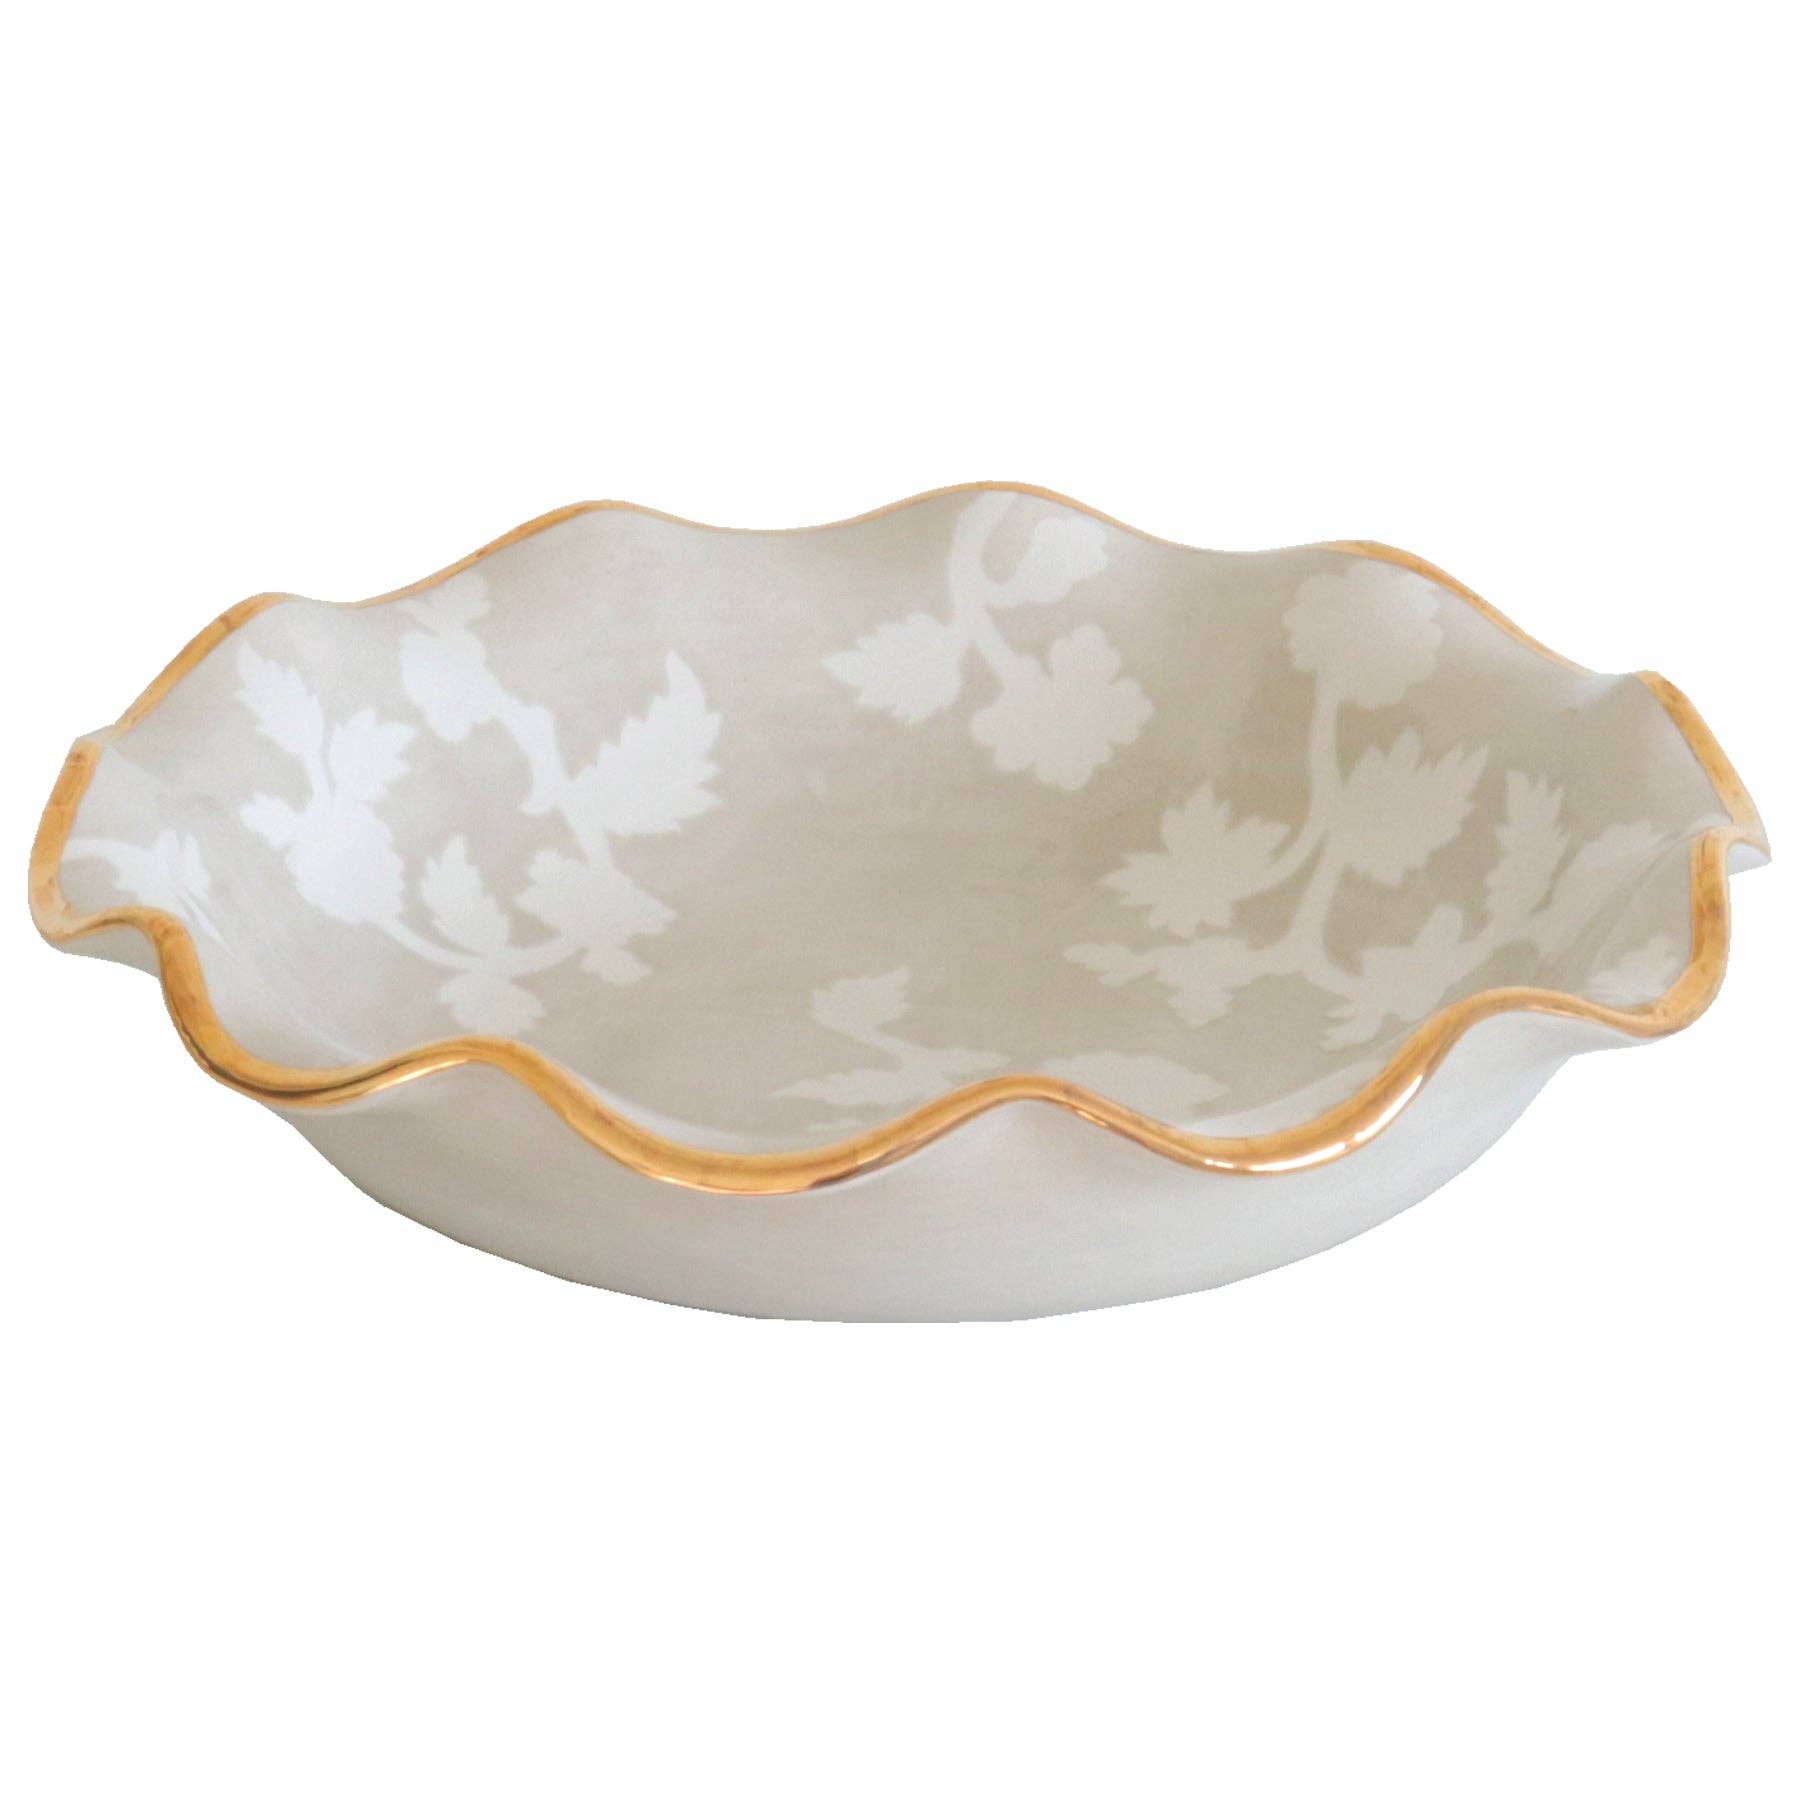 Lo Home by Lauren Haskell Designs Chinoiserie Dreams Scalloped Bowls with 22K Gold Accent: Large / Beige - Littlel Birdies